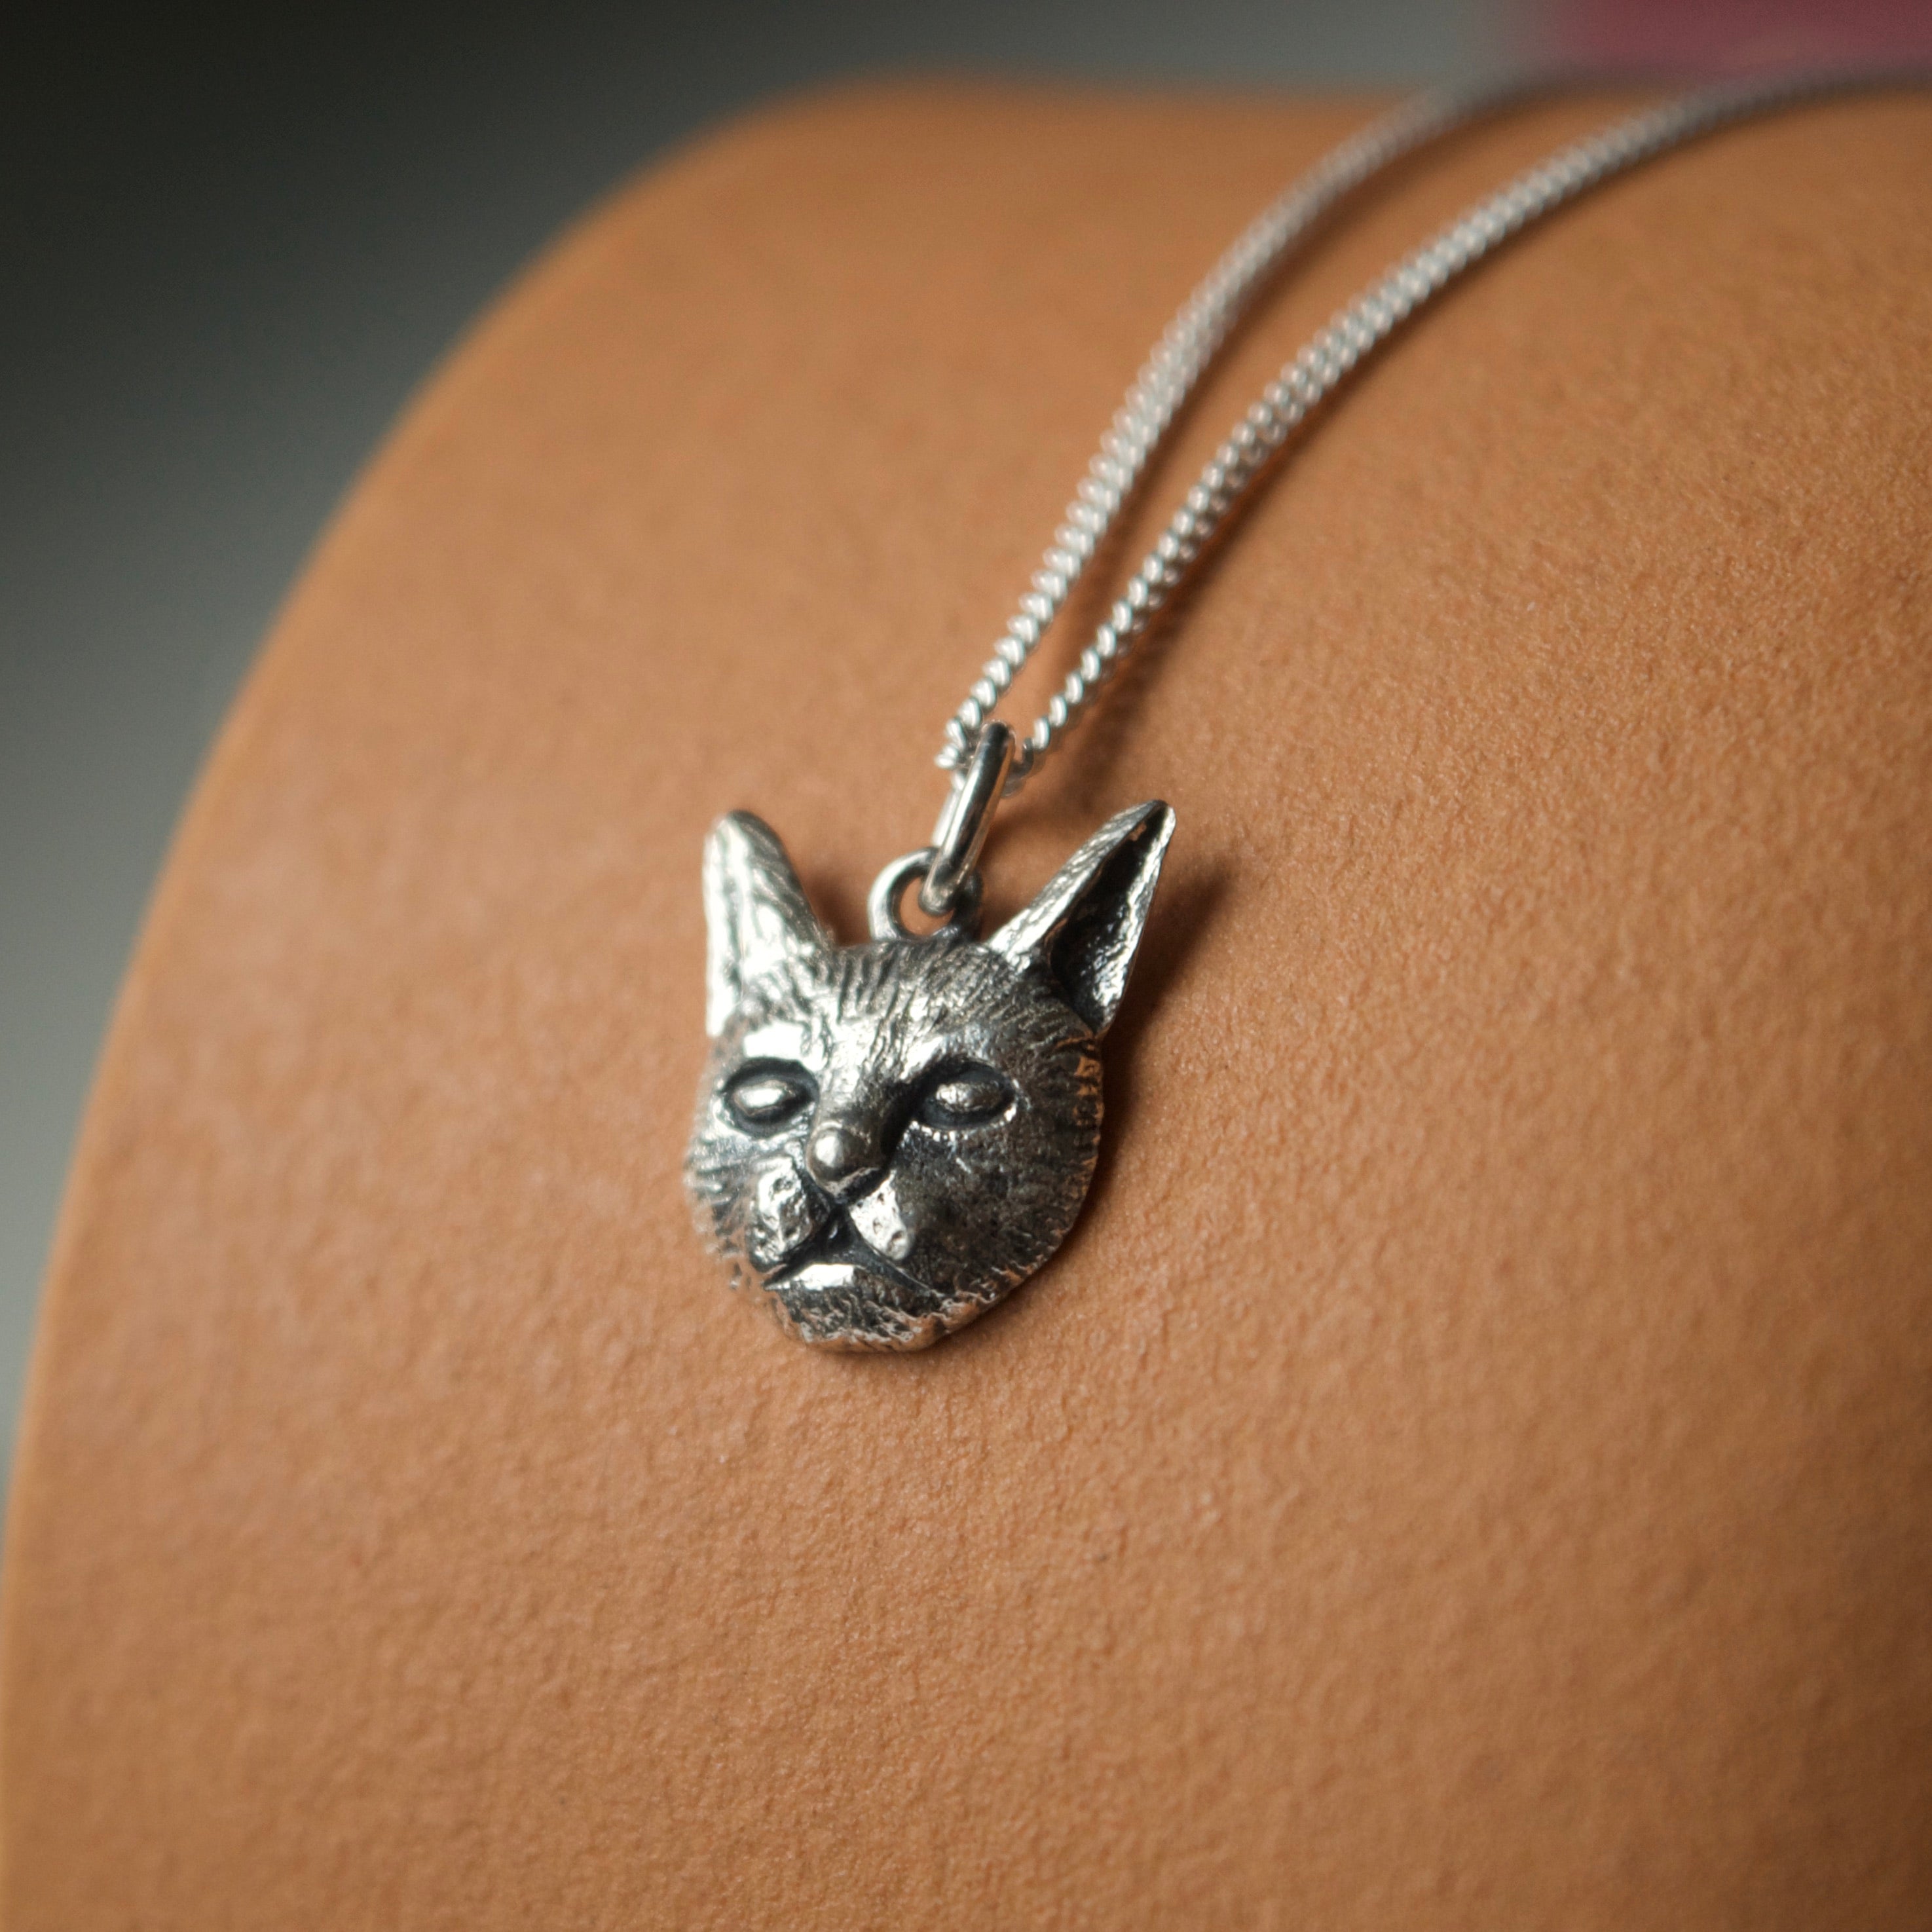 Kitty Cat Charm Necklace